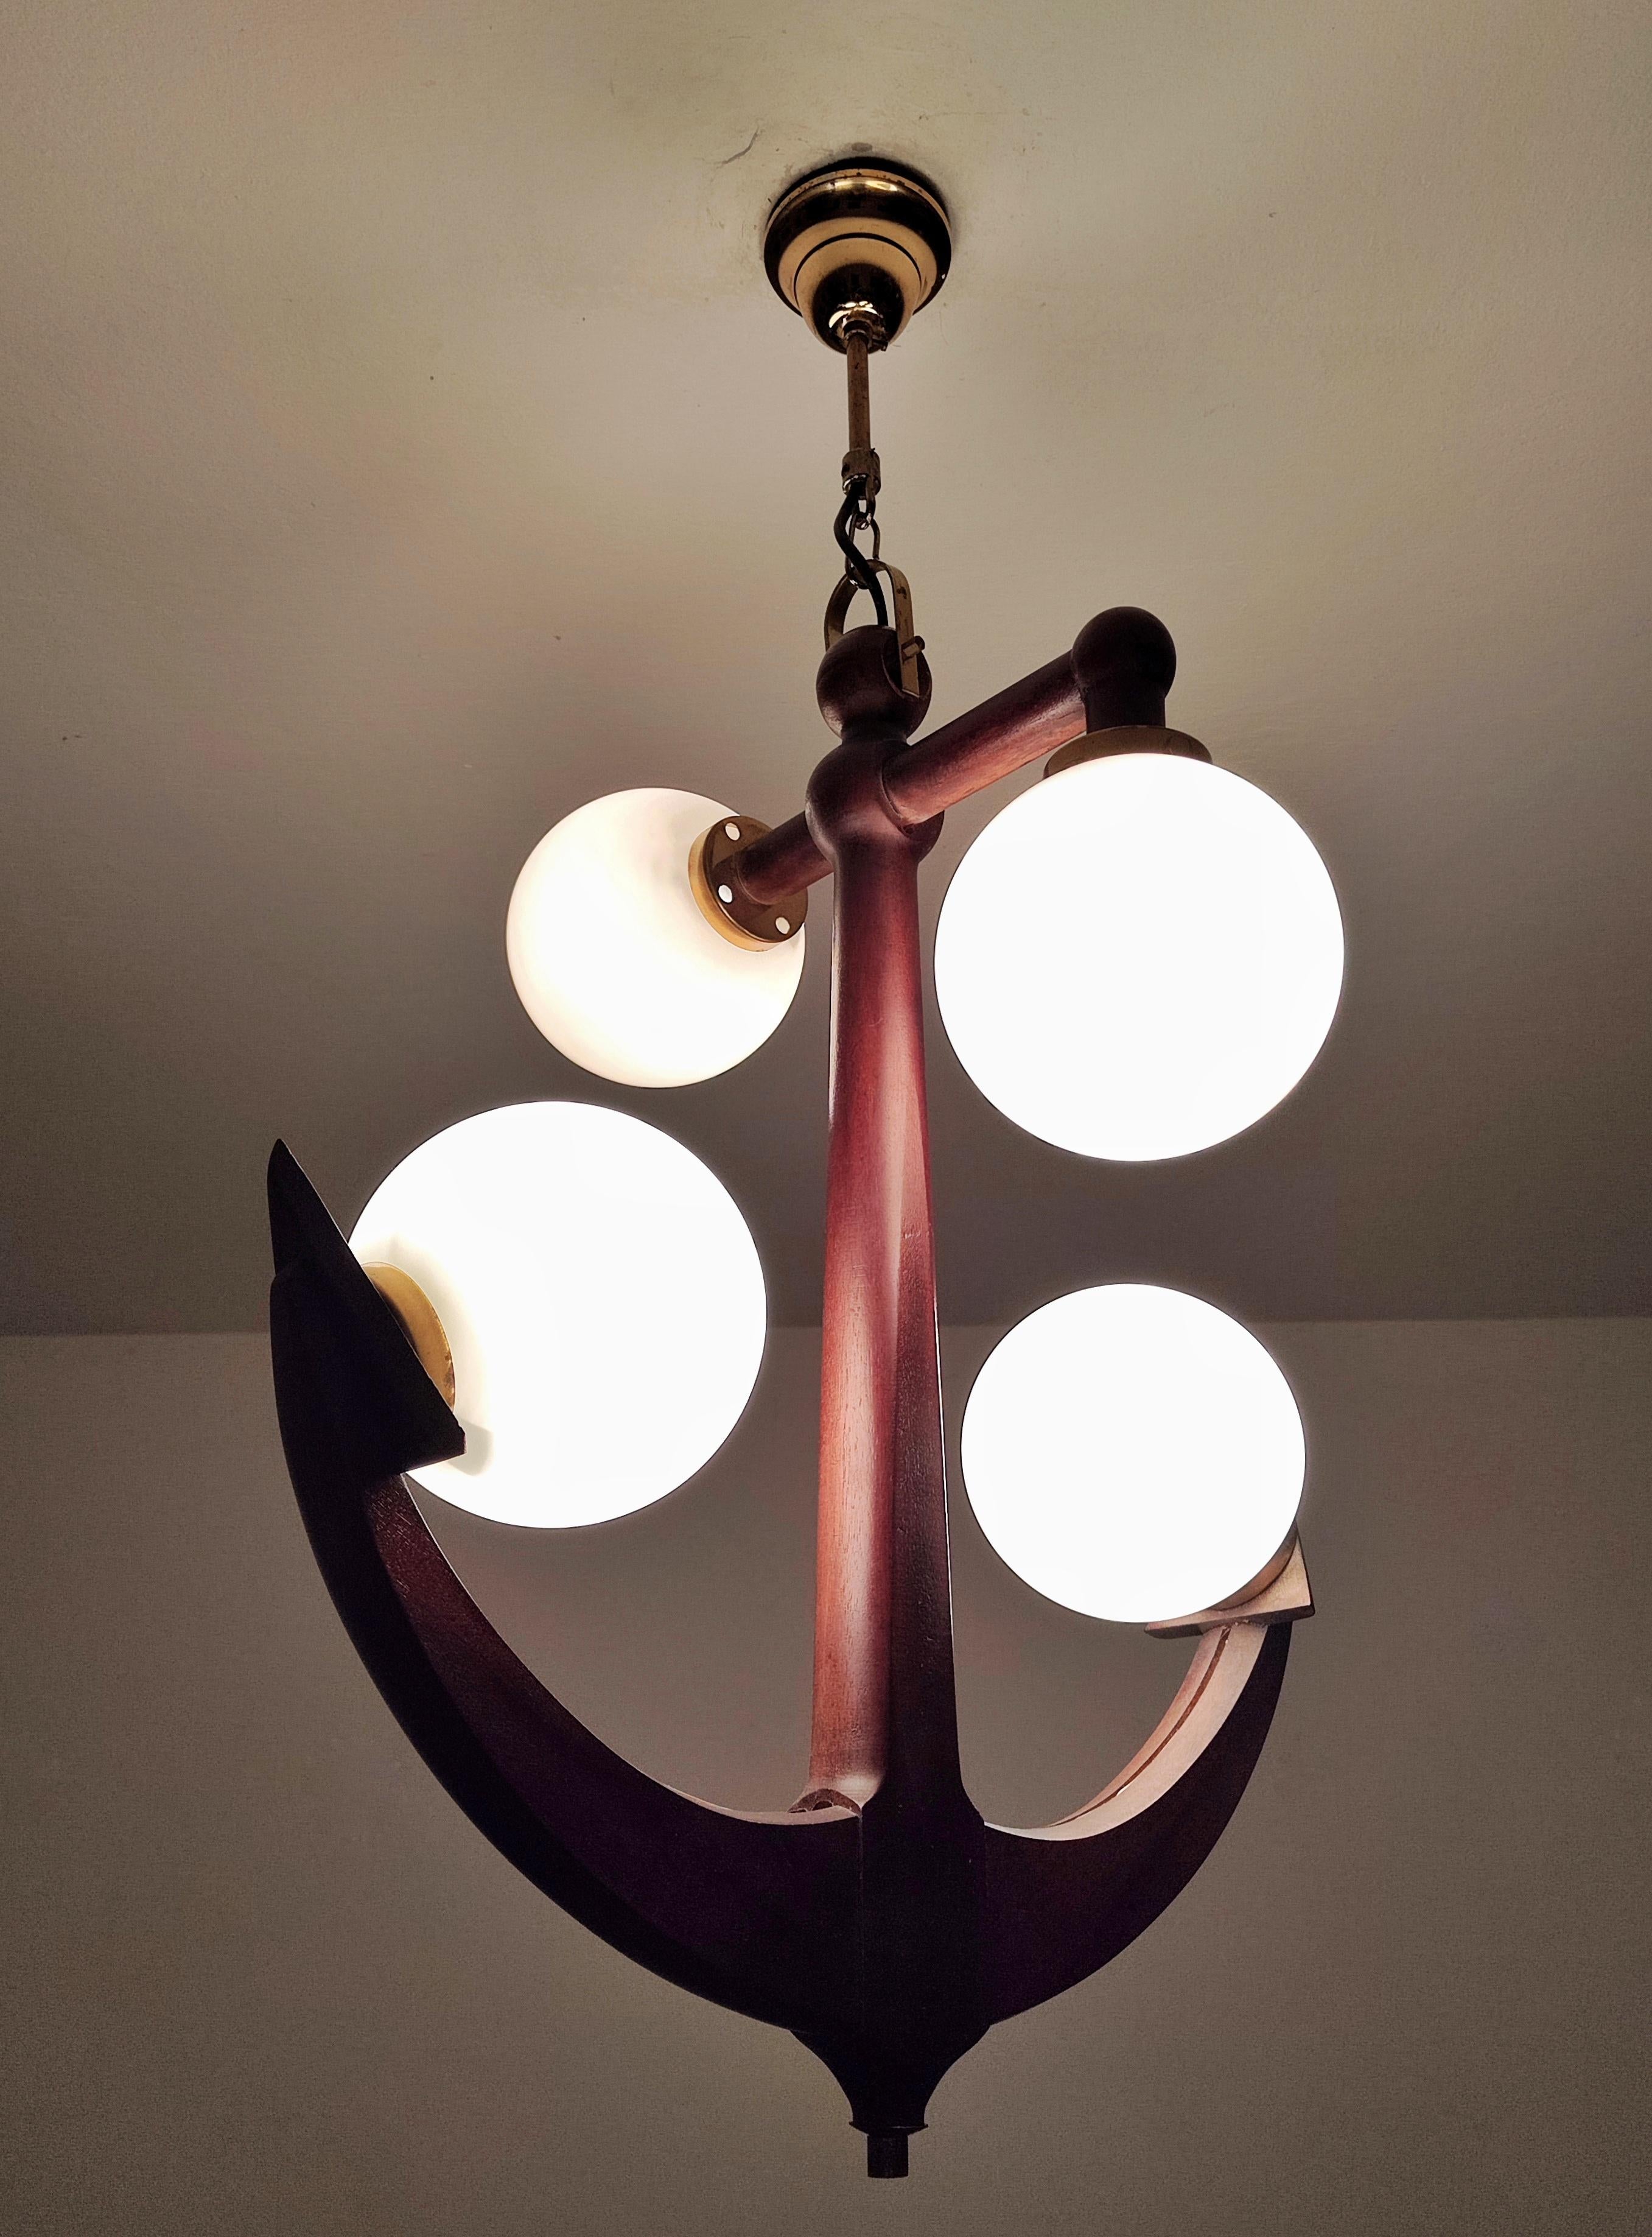 In this listing you will find a spectacular and extremely rare Mid Century Modern light pendant shaped as anchor. It is done in solid mahogany, making this piece very luxurious. It features 4 opaline glass balls shades that provide very soft and